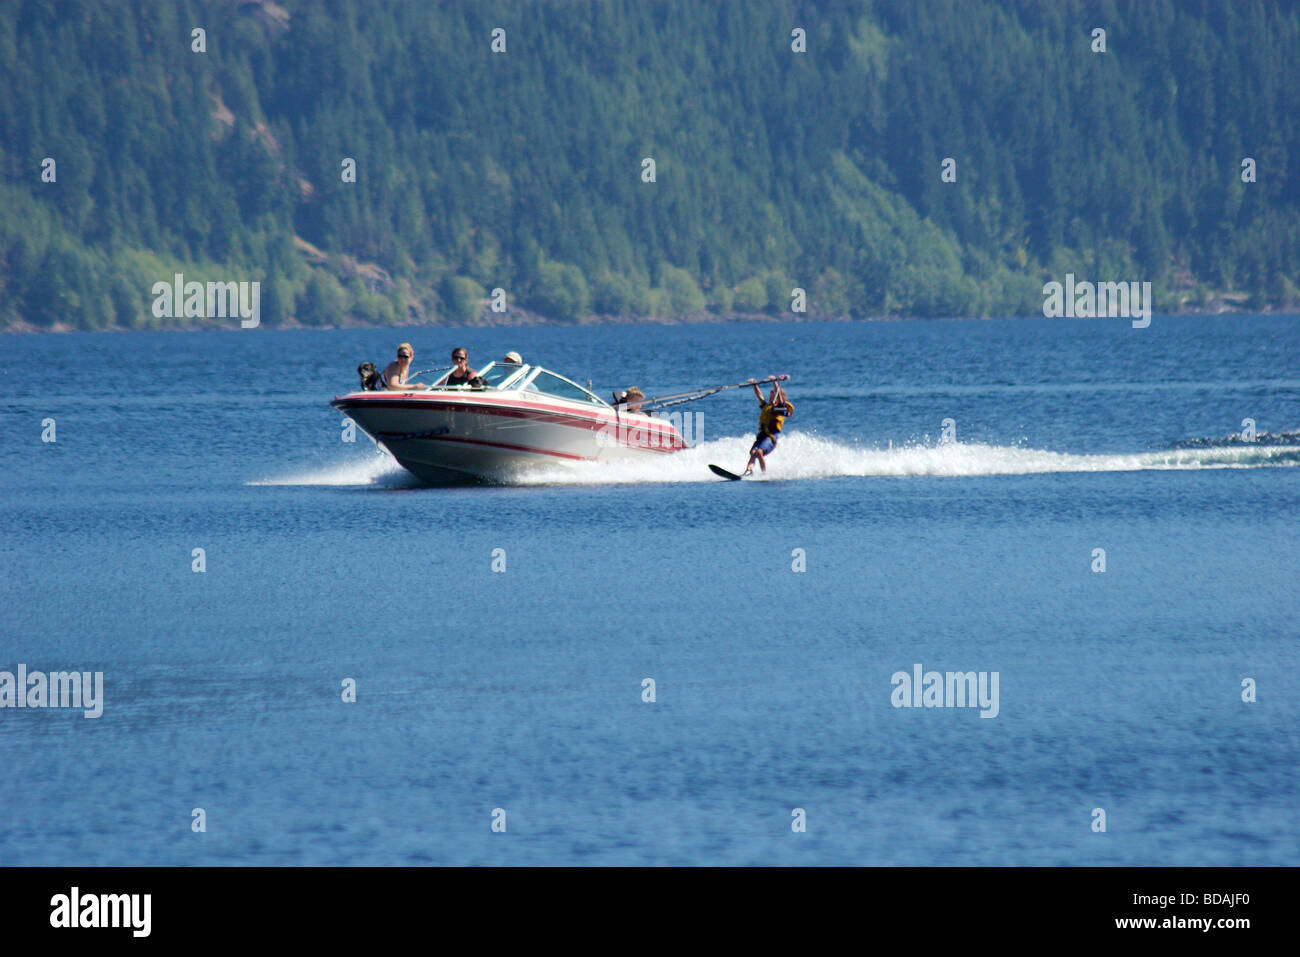 Learning to waterski at a mountain lake in British Columbia Stock Photo